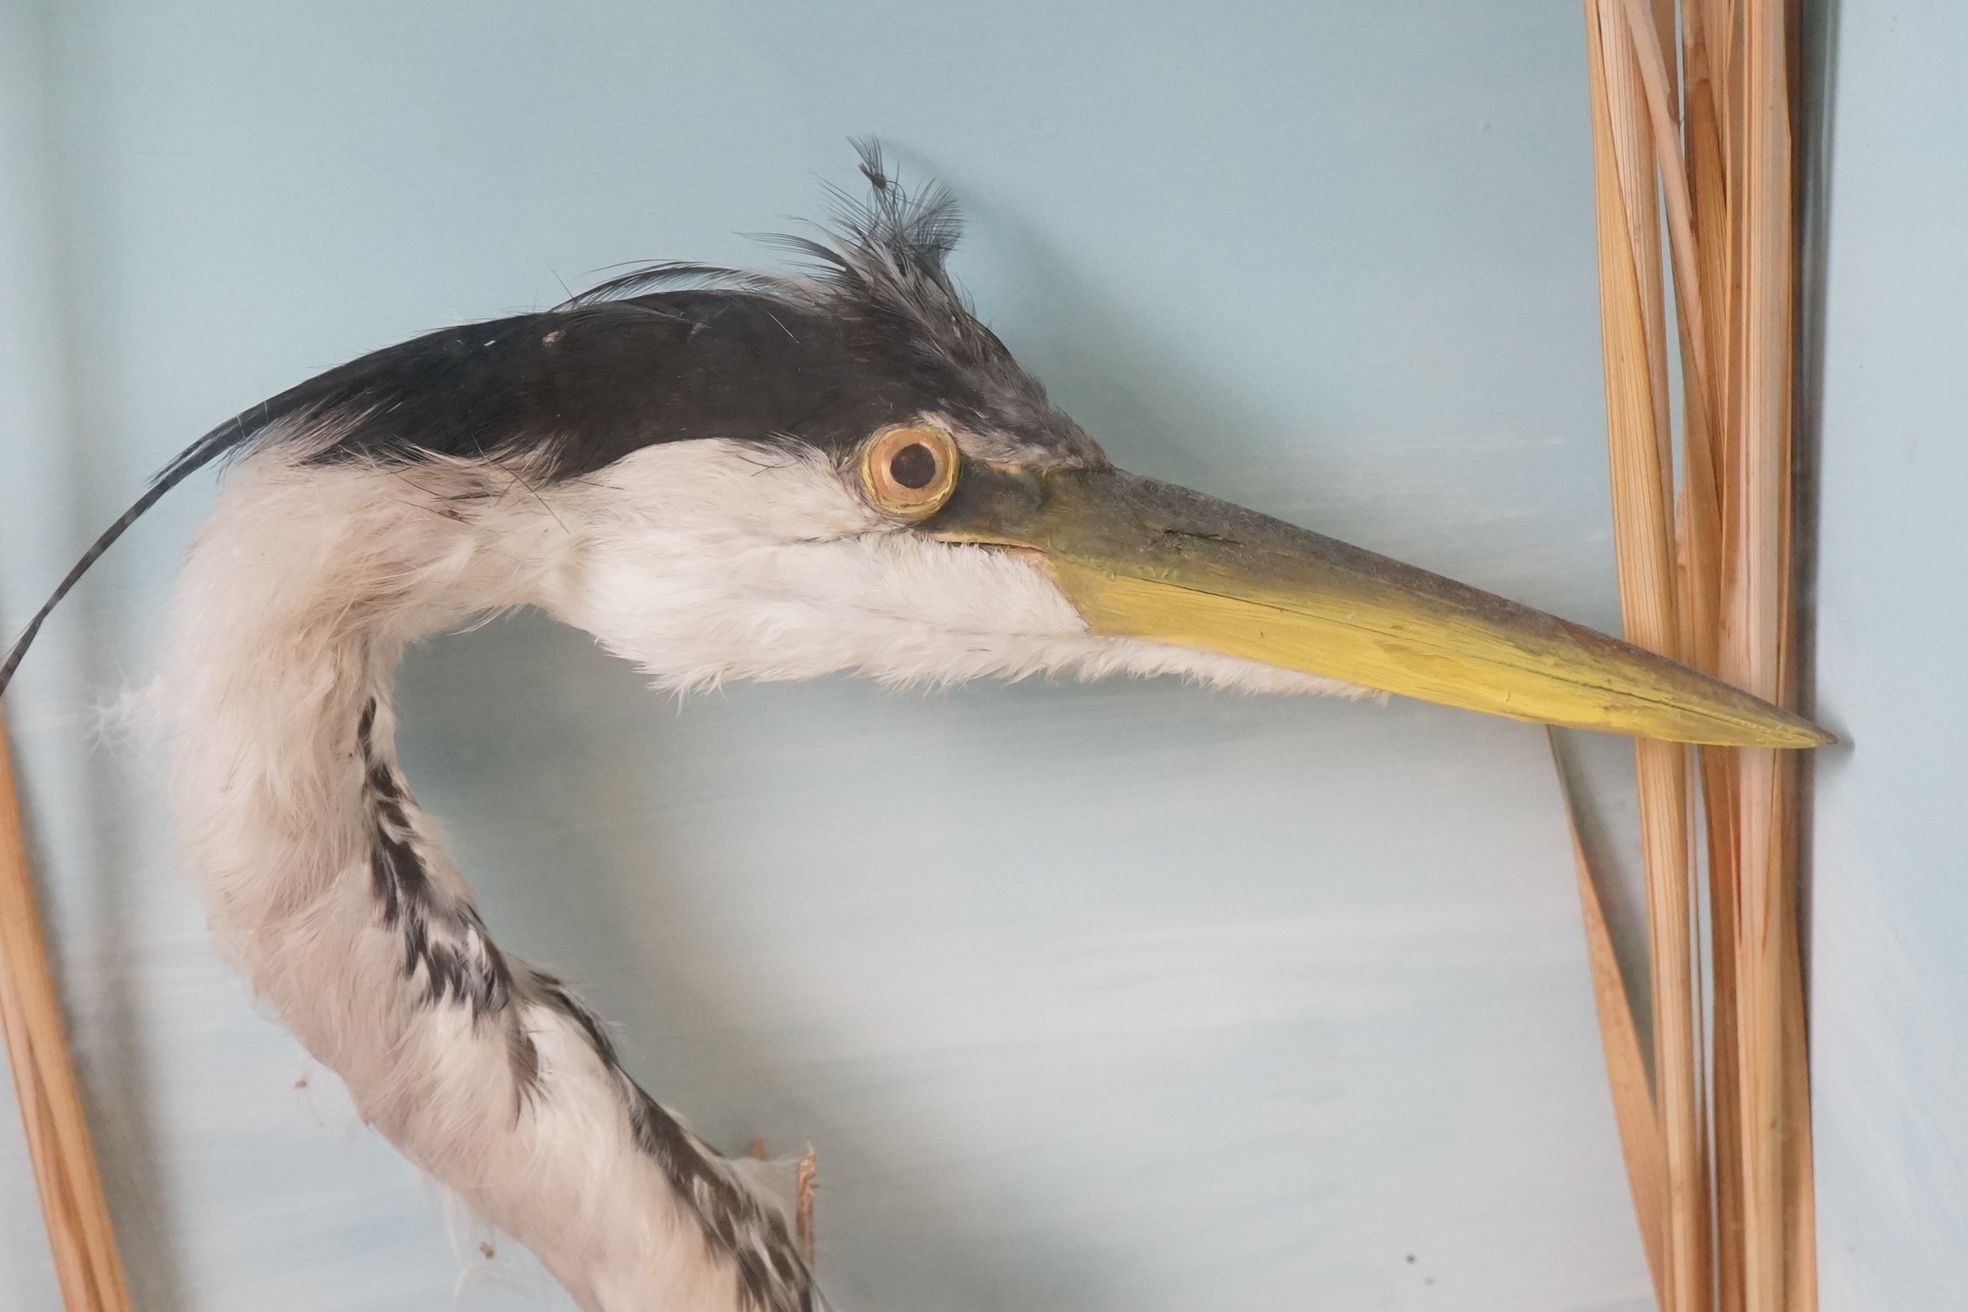 Taxidermy - Standing Heron mounted amongst natural foliage, contained in a glass fronted display - Image 2 of 8